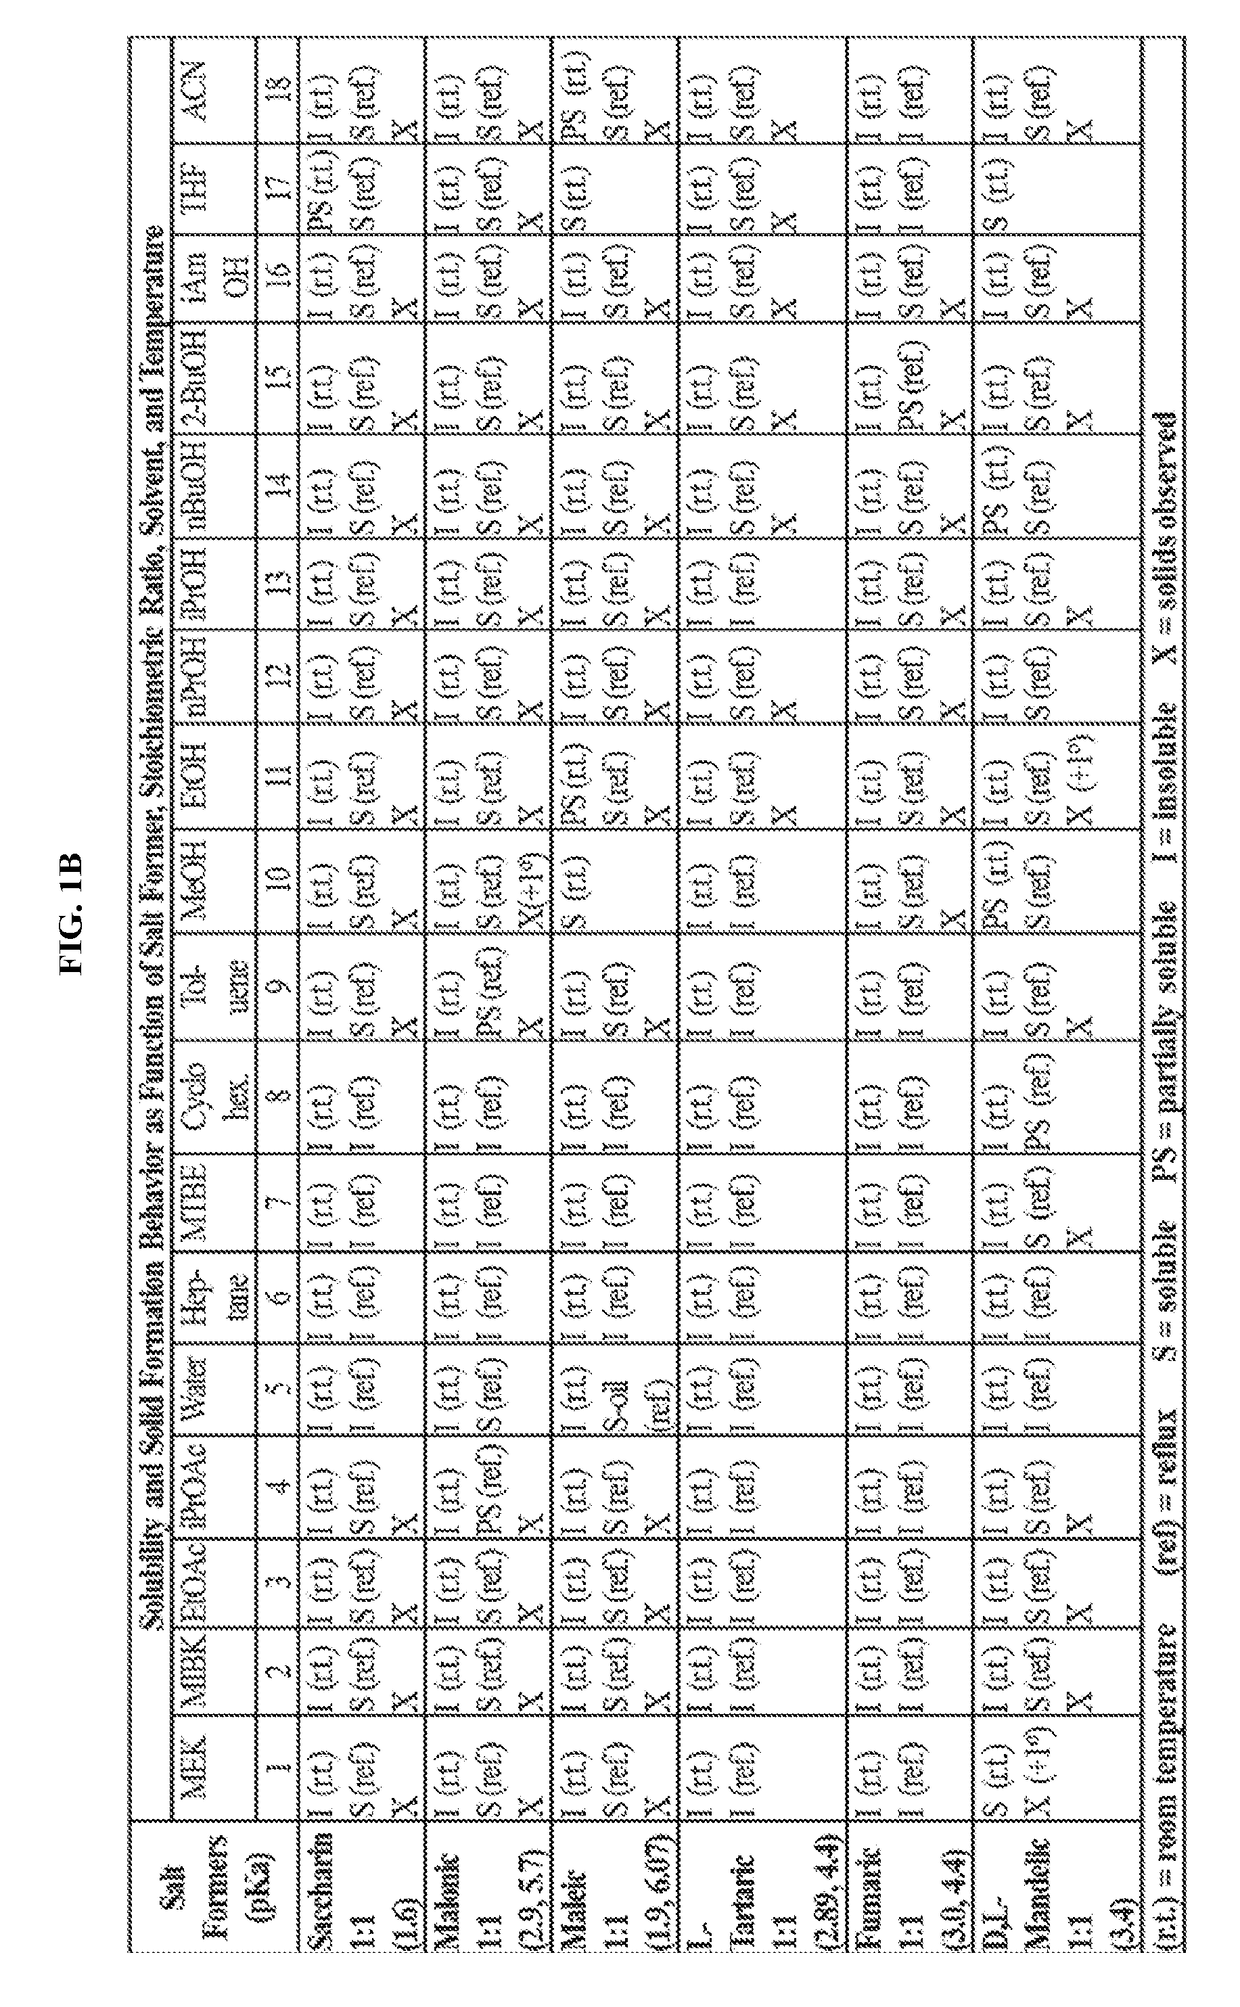 Novel Breathing Control Modulating Compounds, and Methods of Making and Using Same